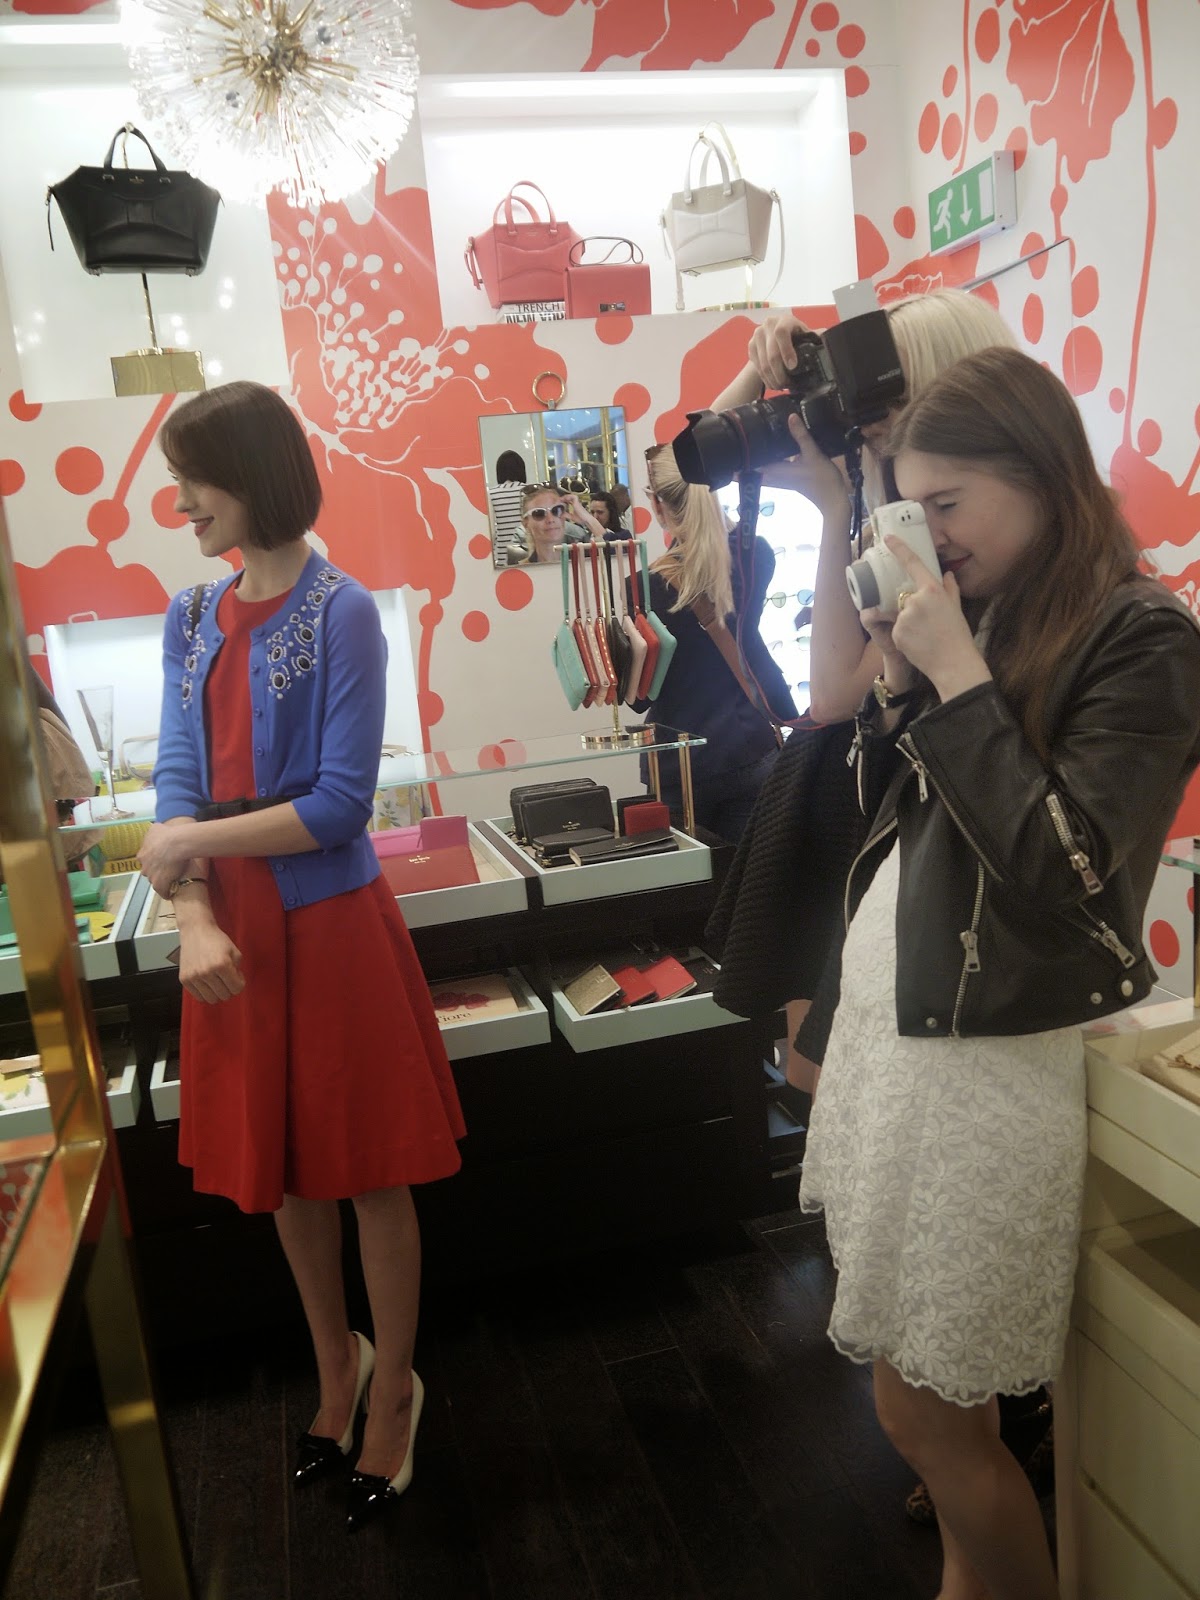 Ella Catliff and Holly McGlynn at the Kate Spade Event